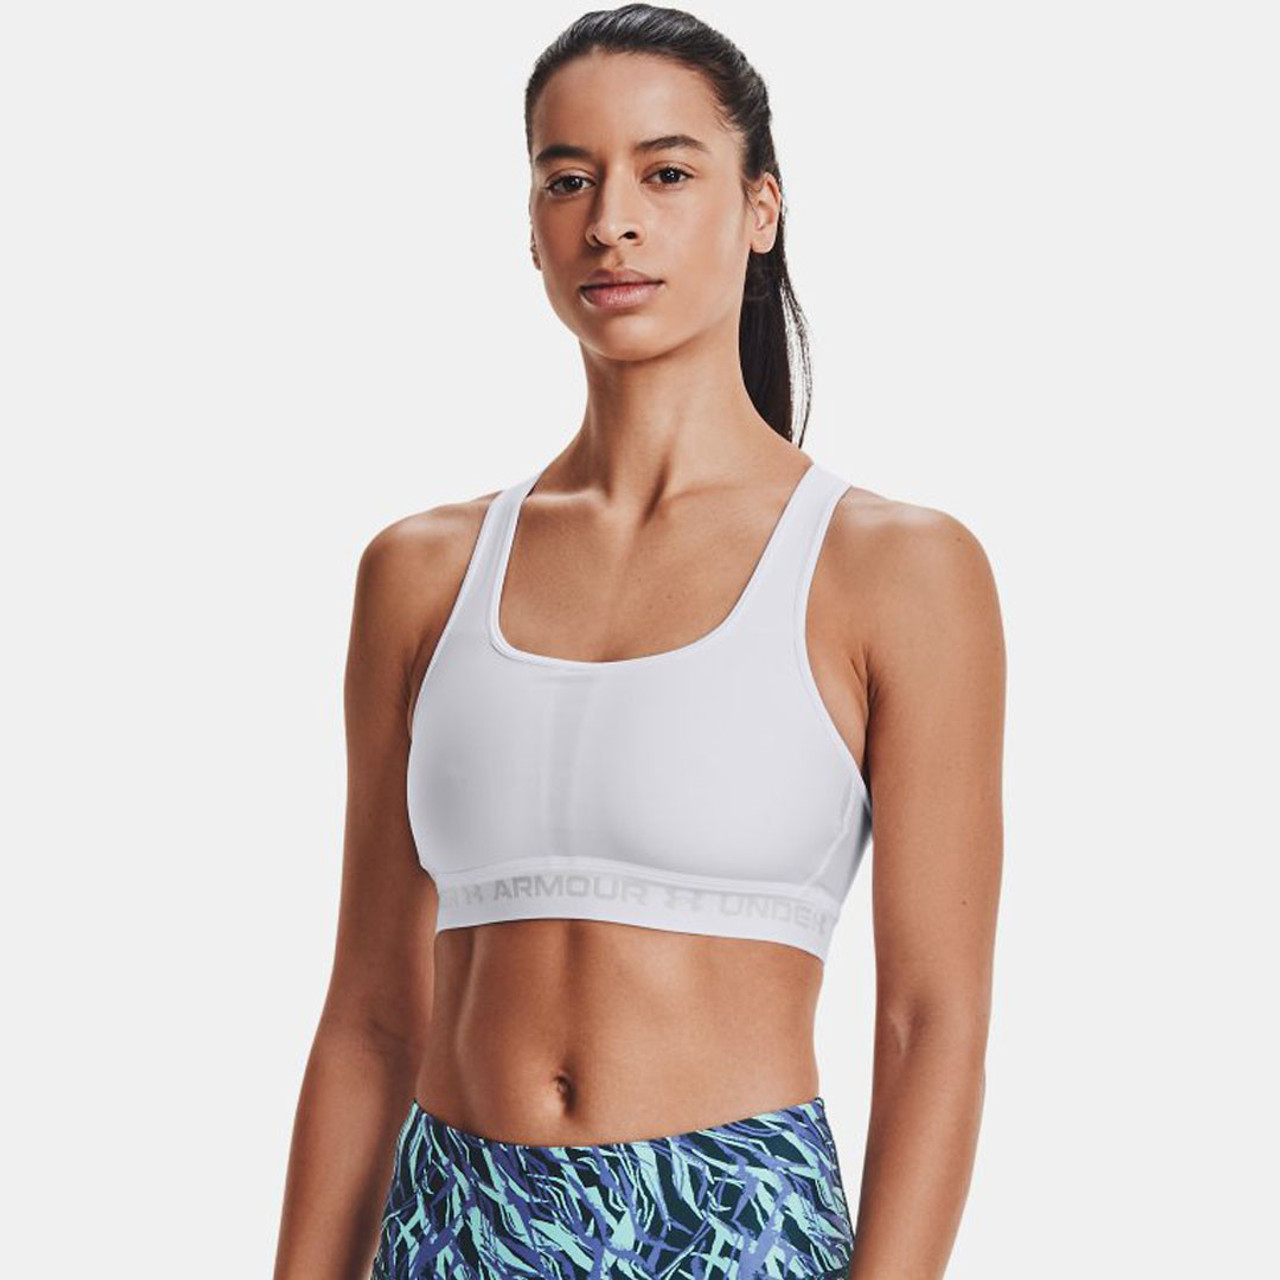 Under Armour Women's Mid Crossback Sports Bra - SLOCOG'S - Under Armour  Project The Rock 3 Training Shoe Academy Blue